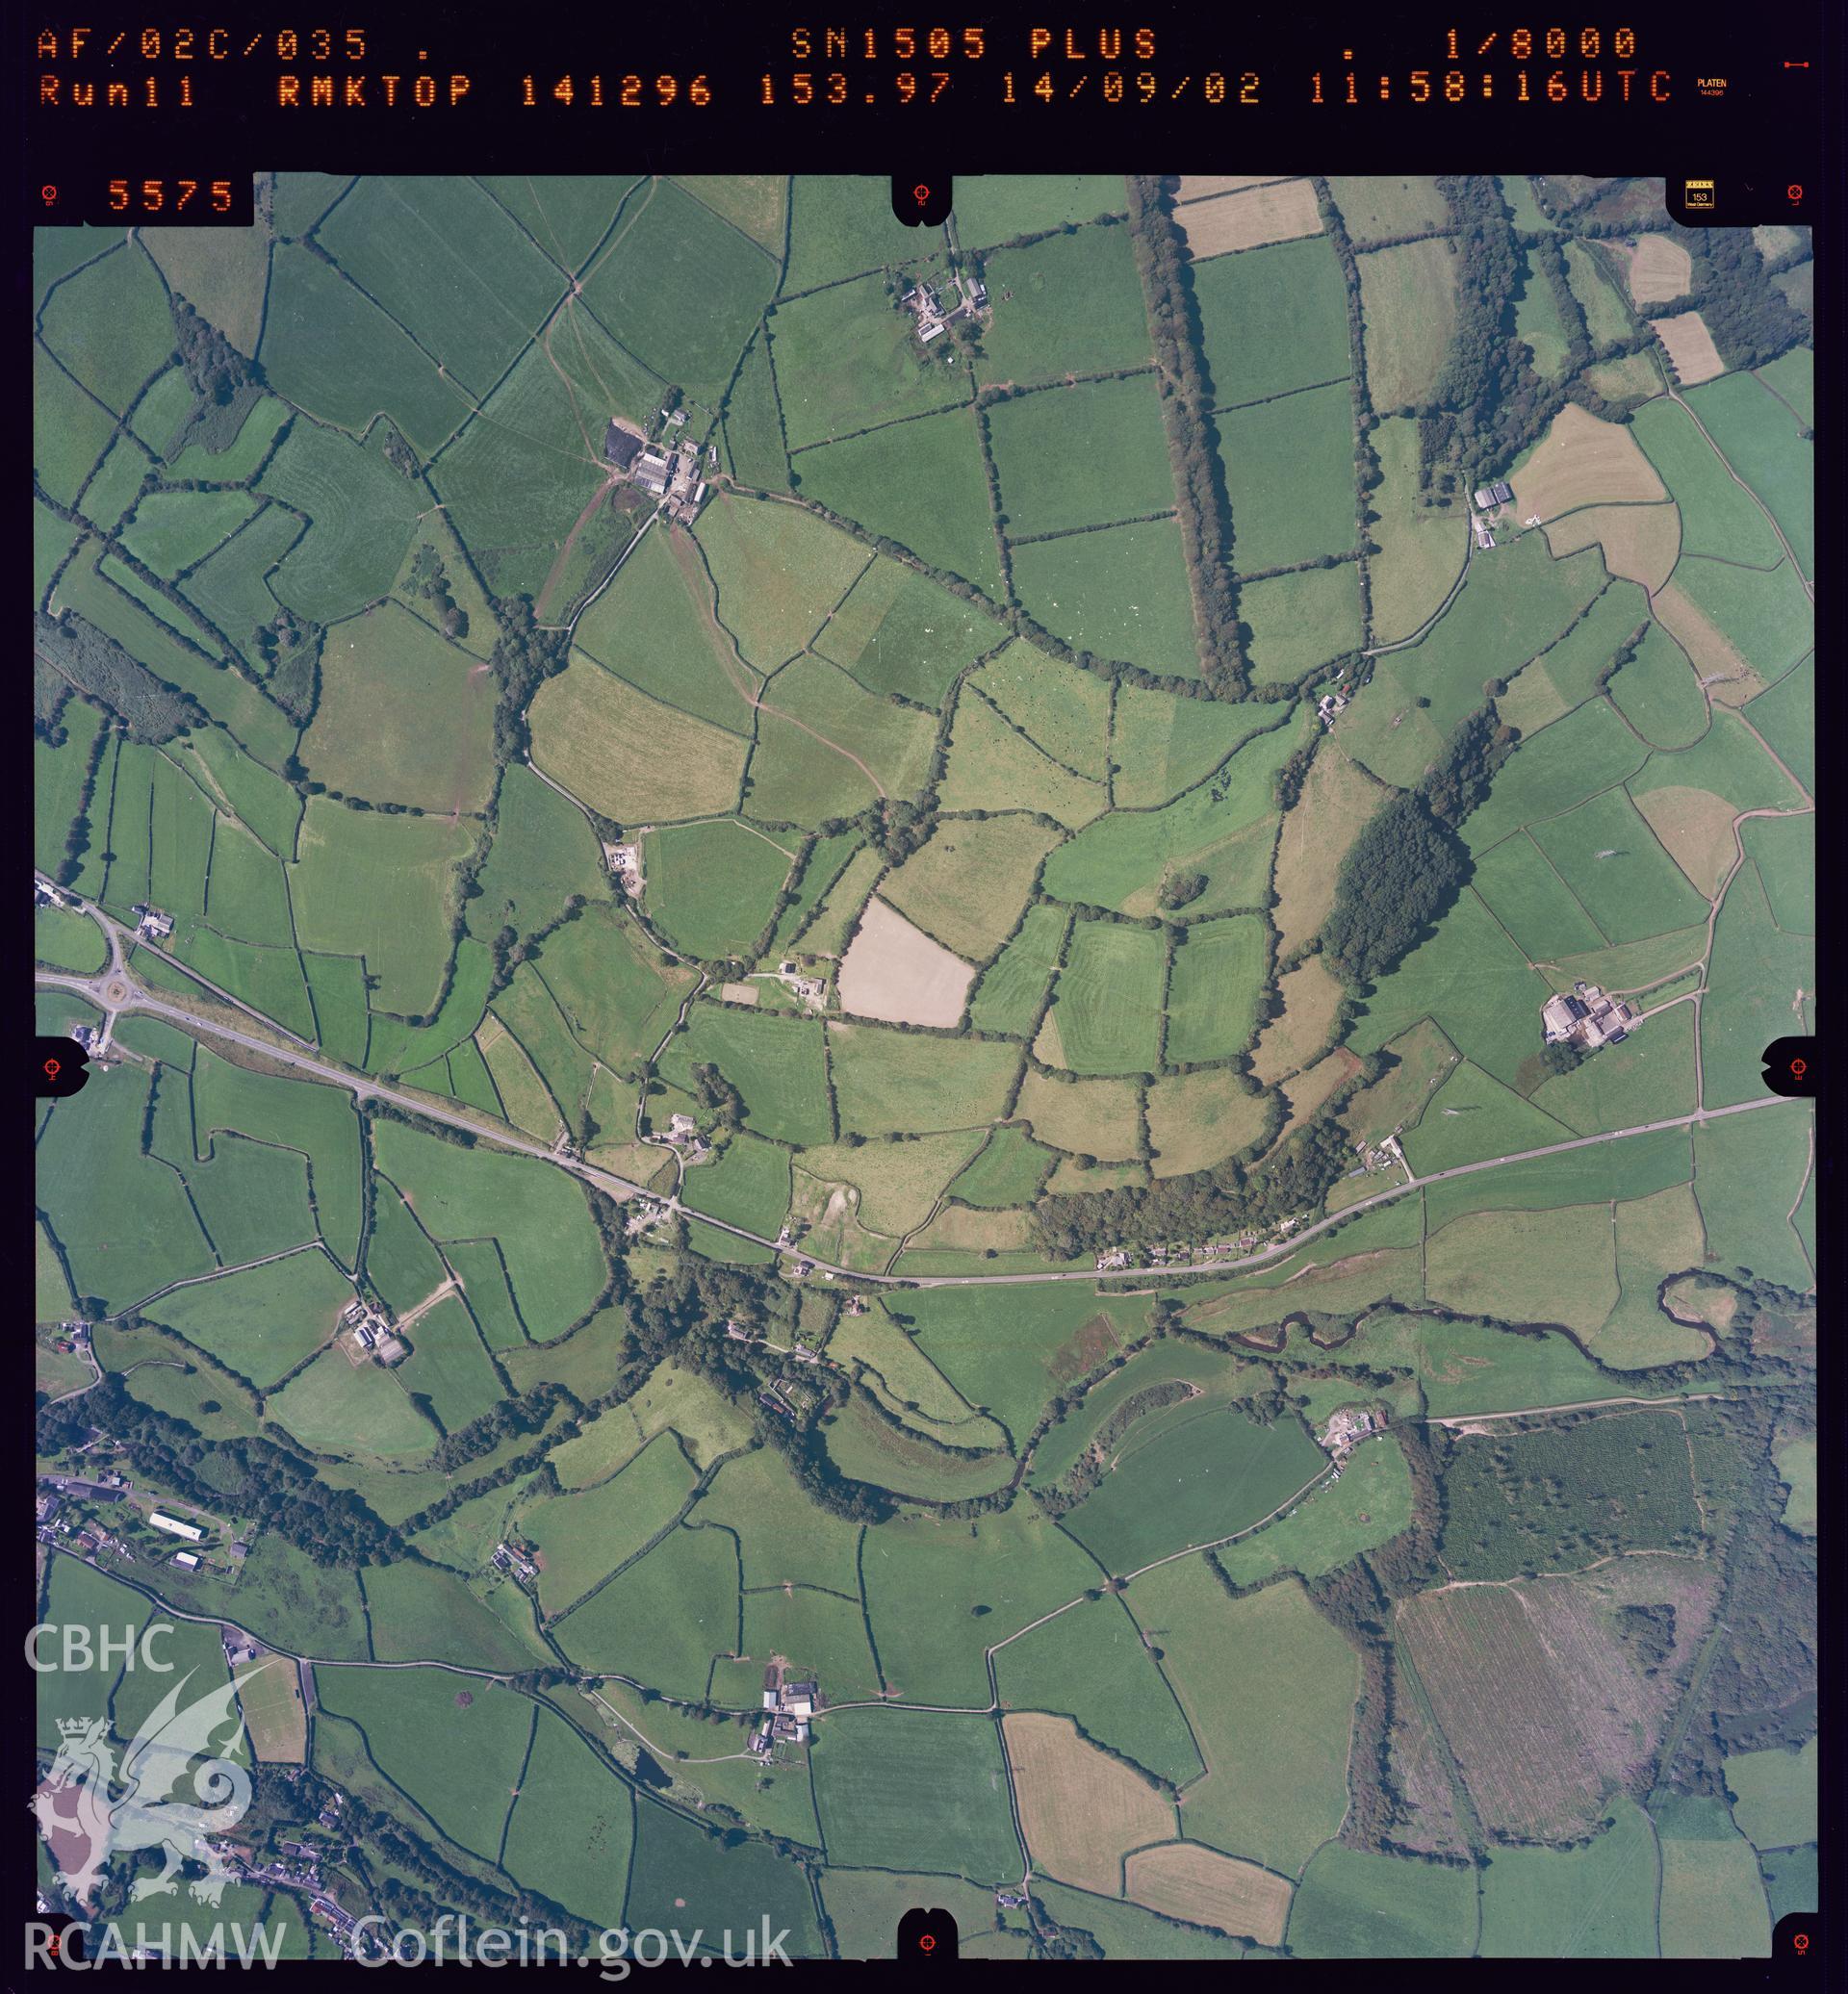 Digital copy of an aerial view of Kidwelly by Ordnance Survey, 2002.